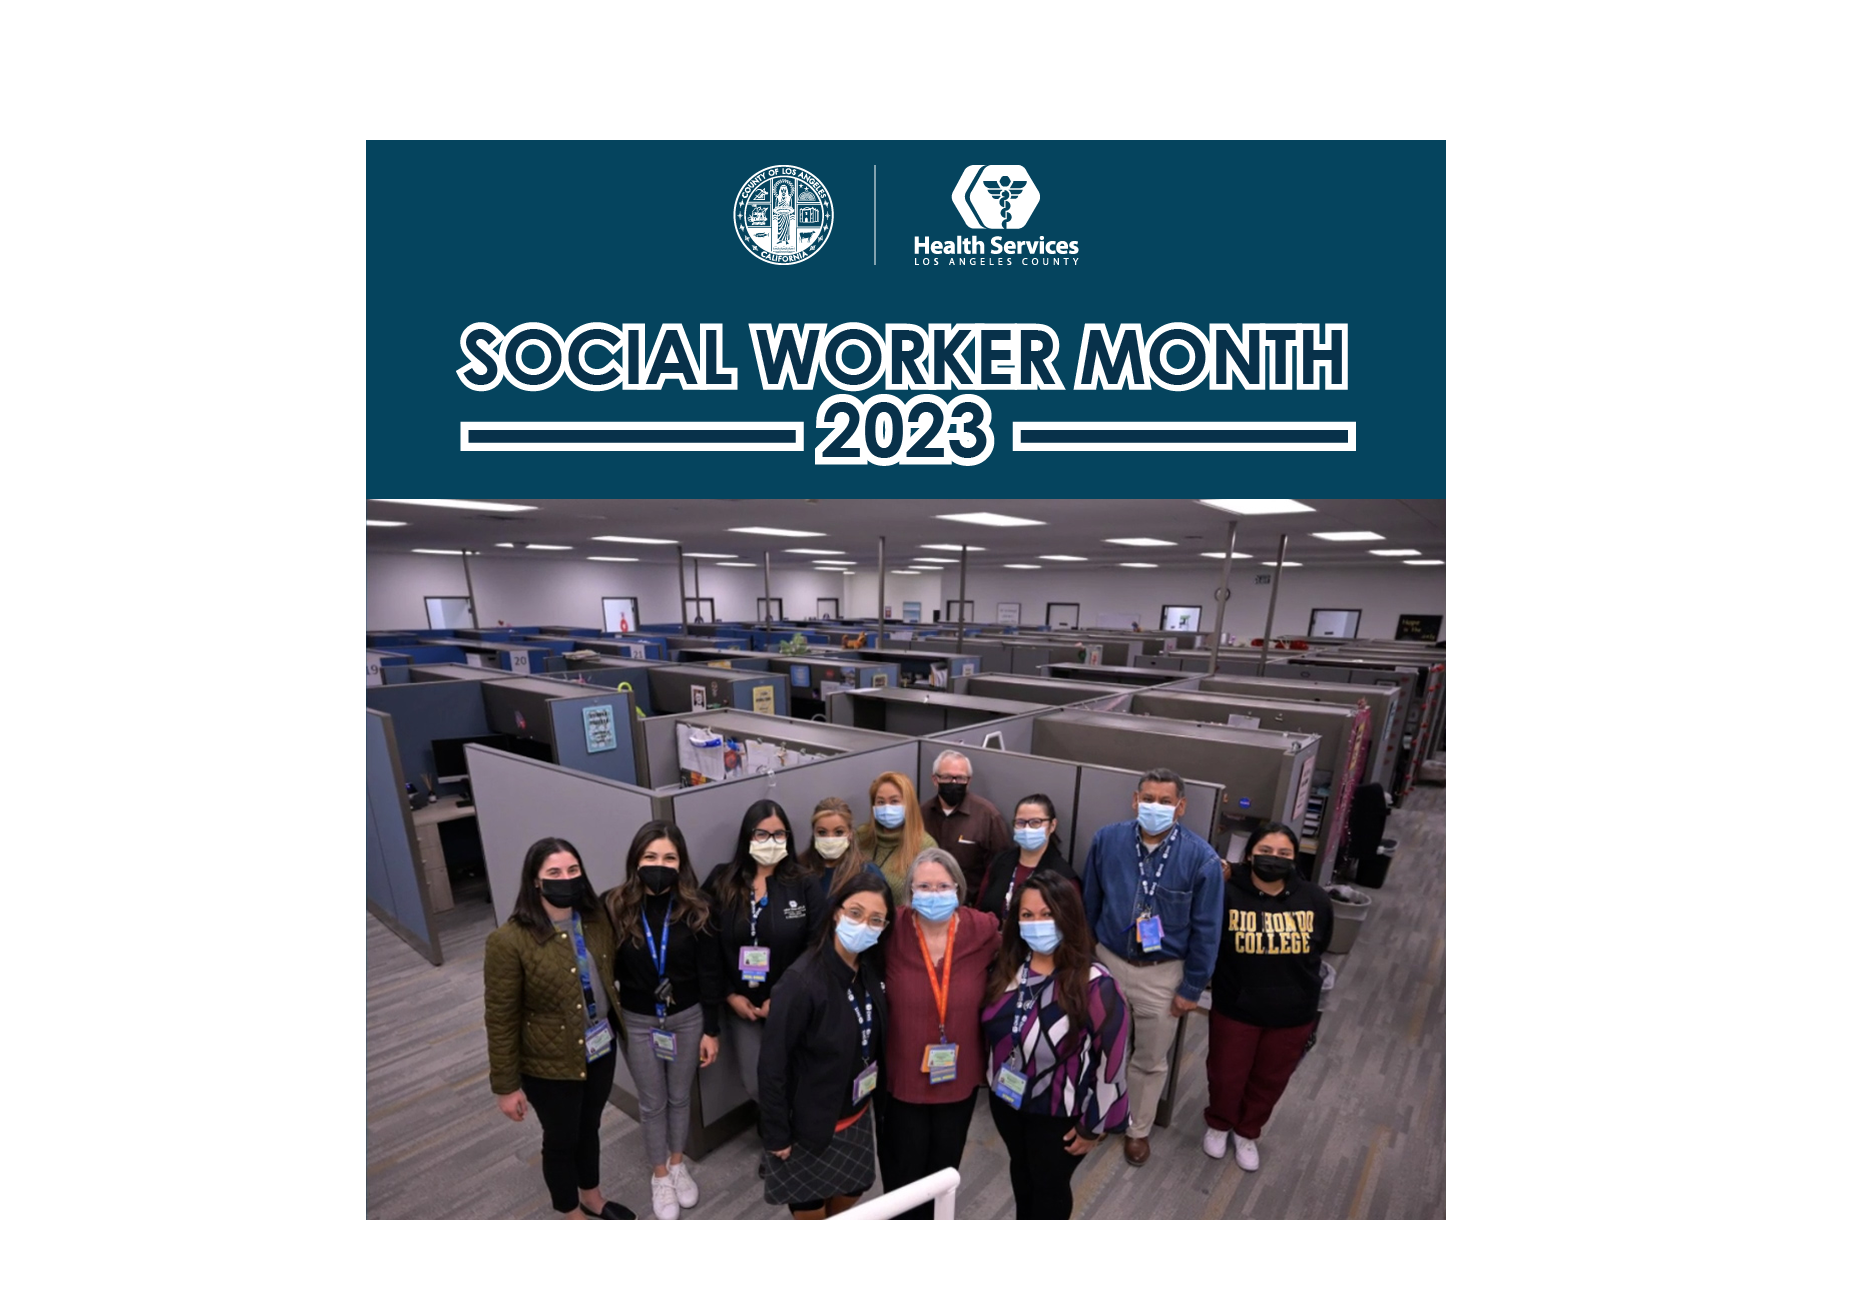 Social Worker month 2023